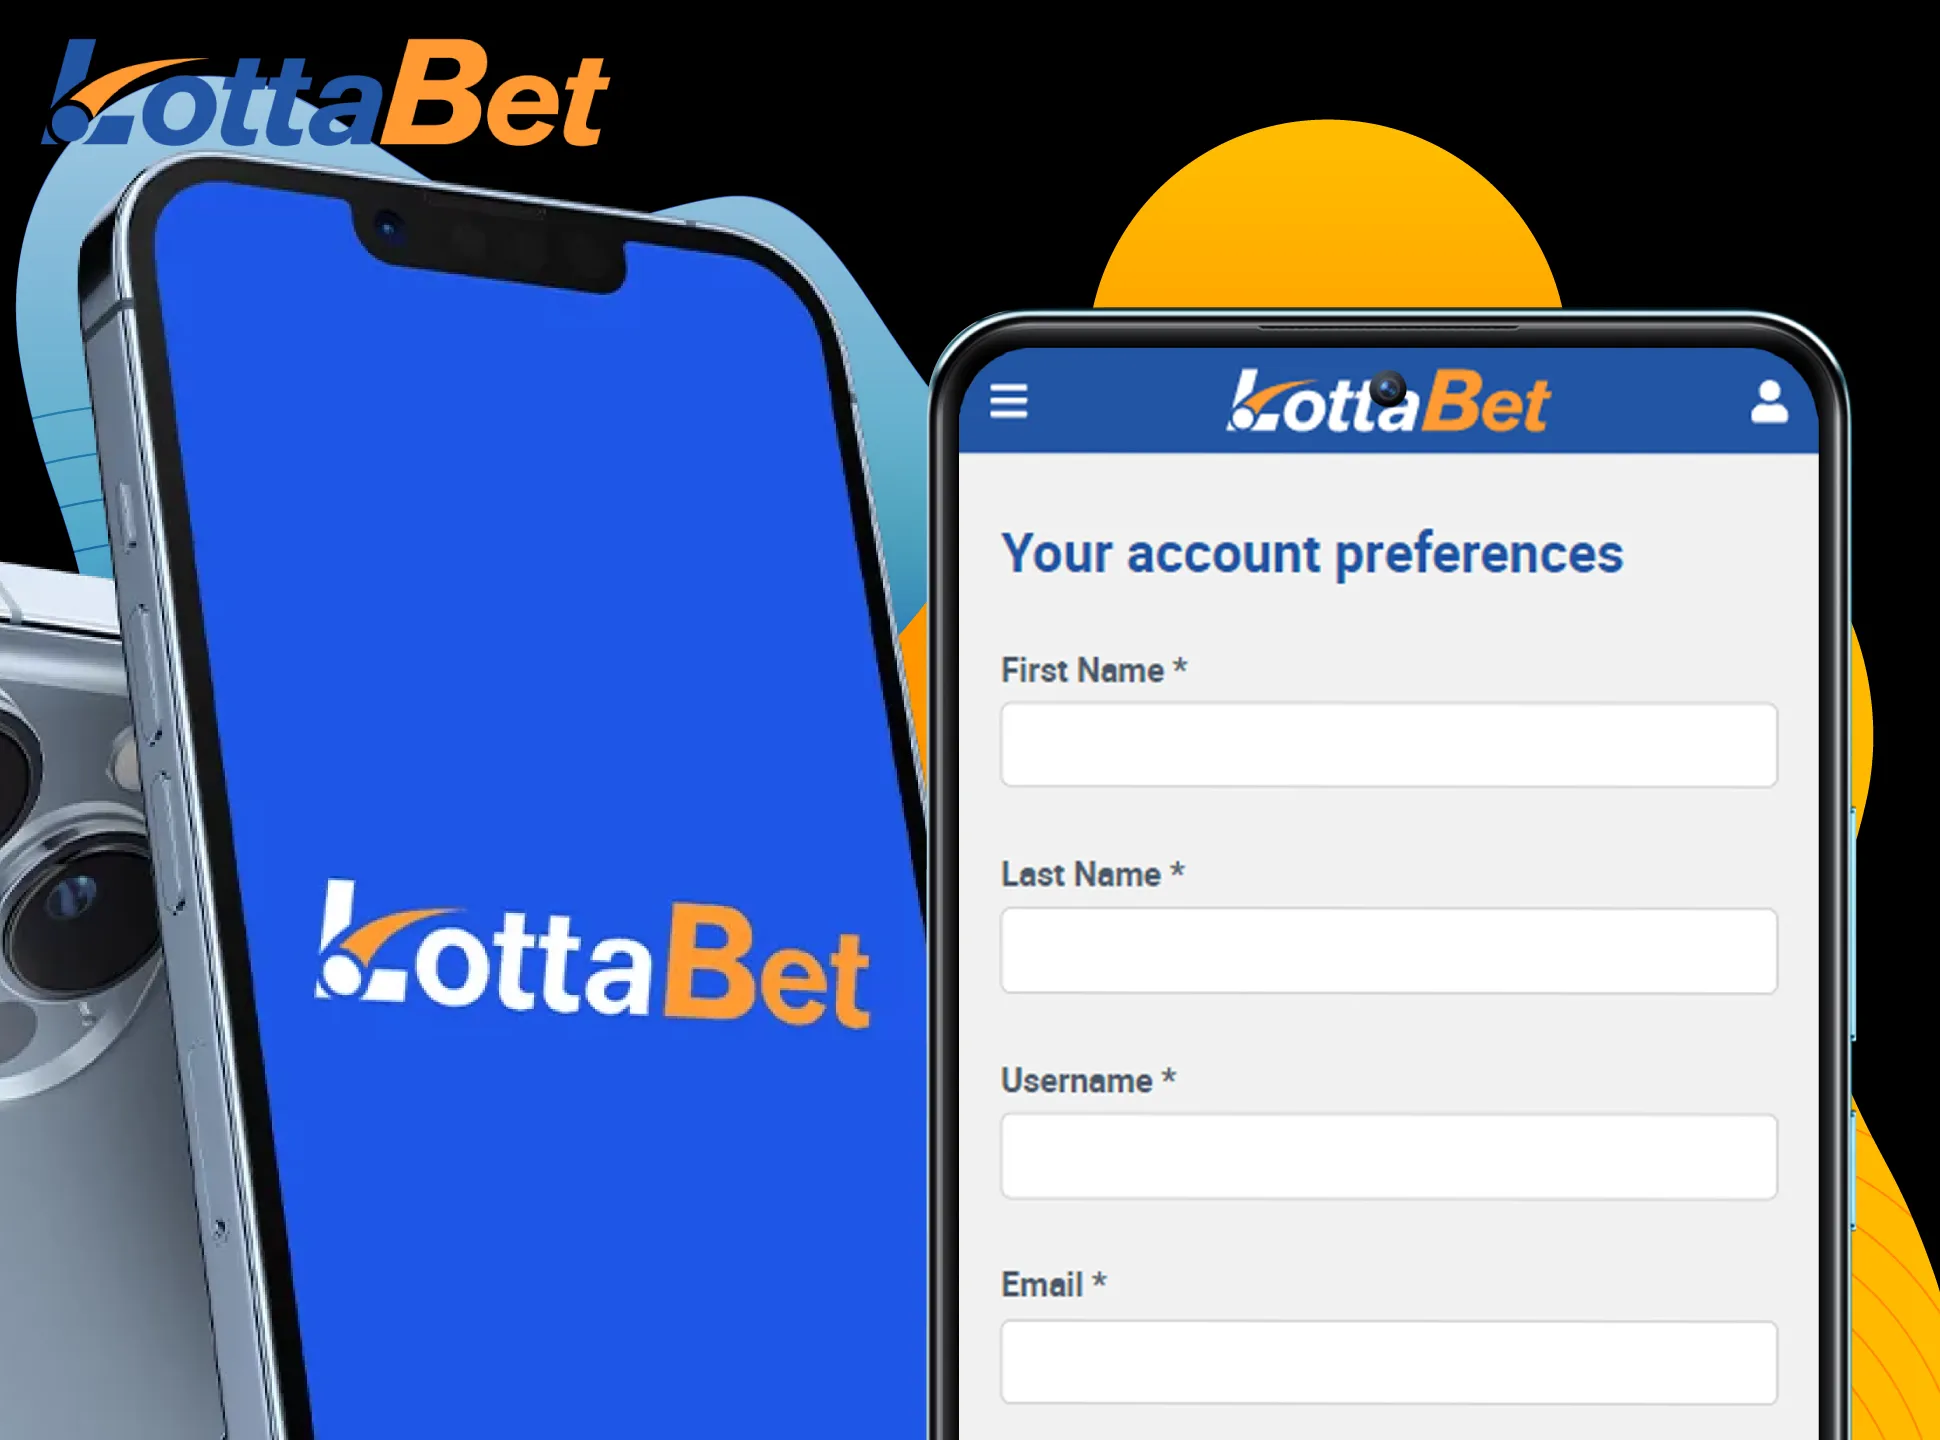 Download the Lottabet app and create an account.